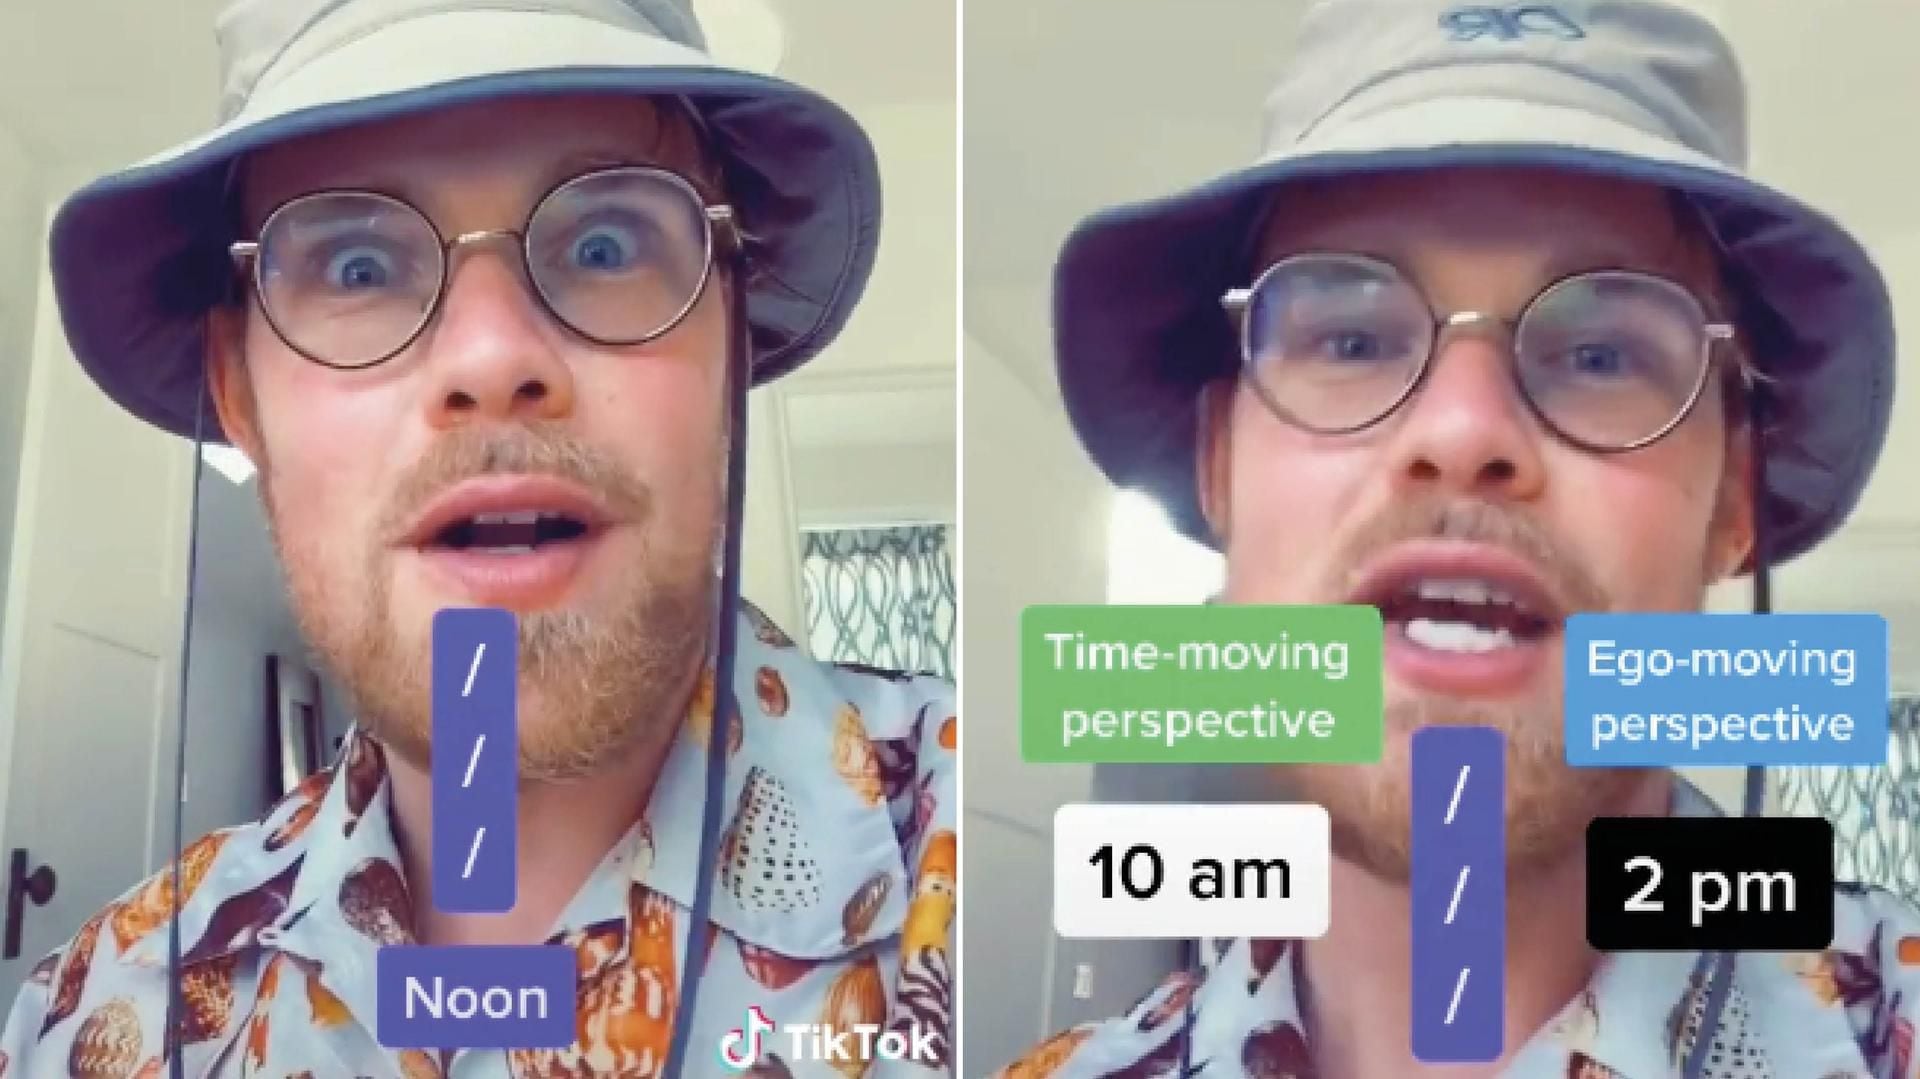 How Do You Perceive Time Viral Tiktok Video Explains The Different Ways People Interpret The Clock